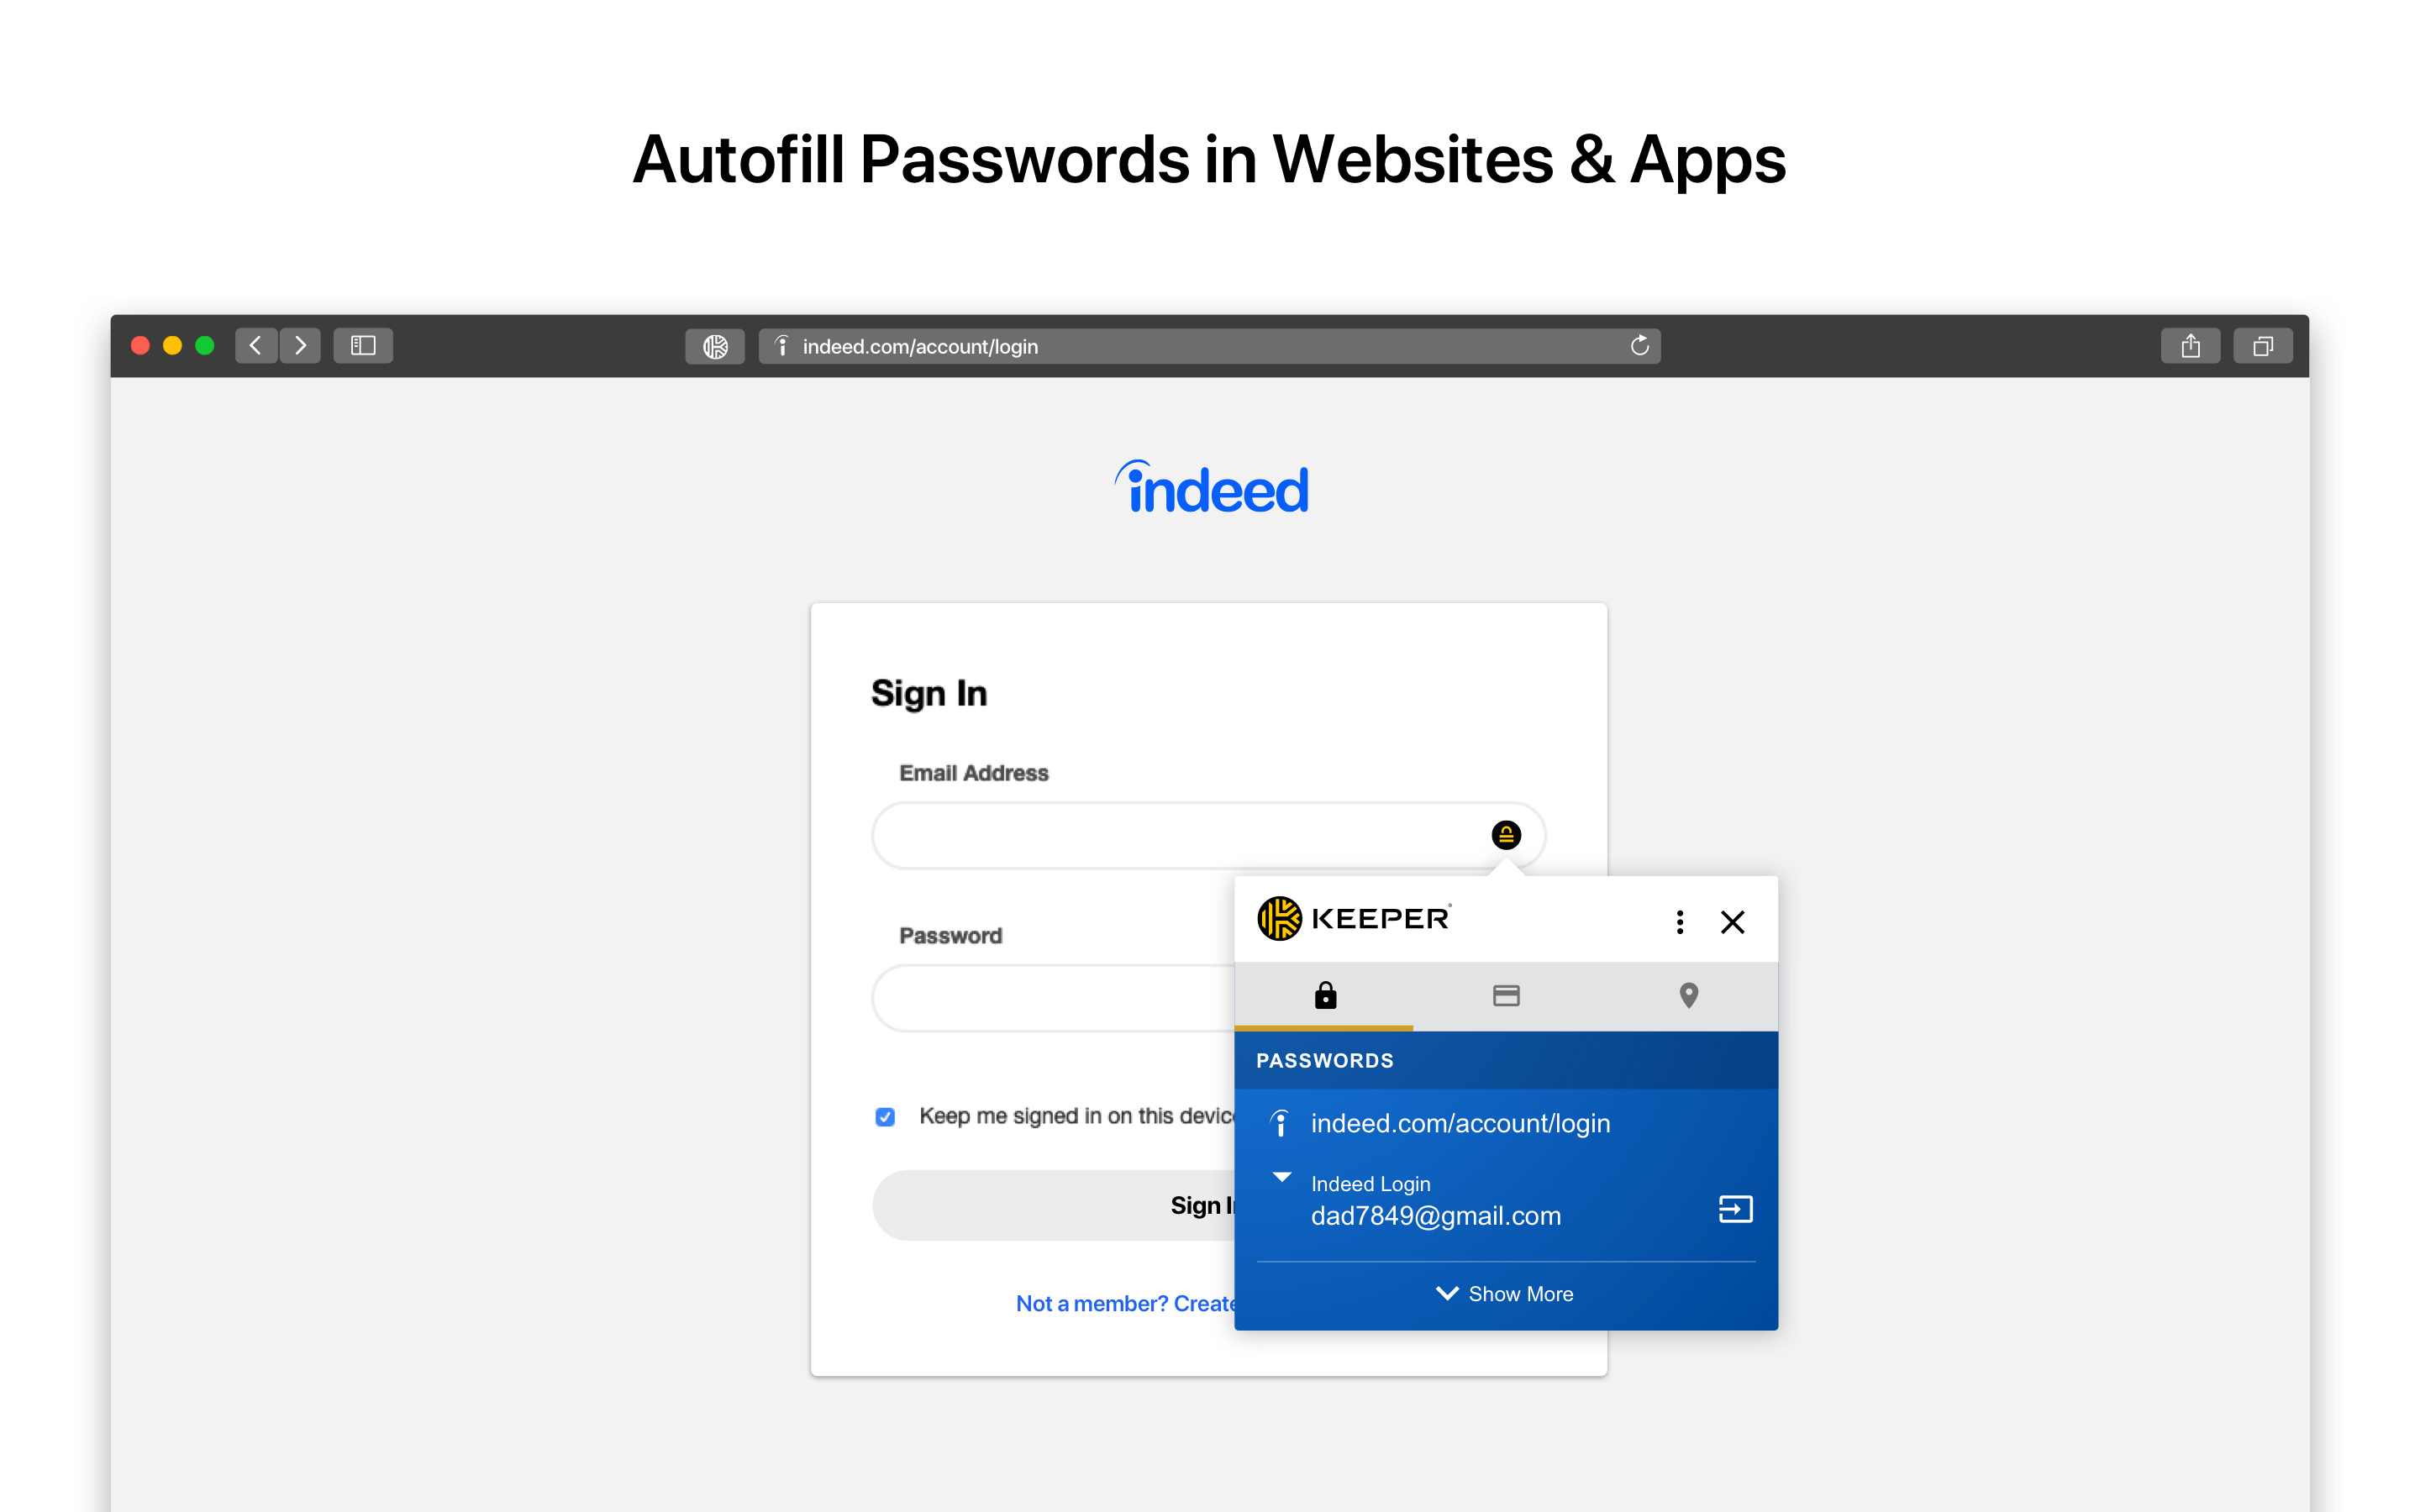 Autofill password in websites and apps